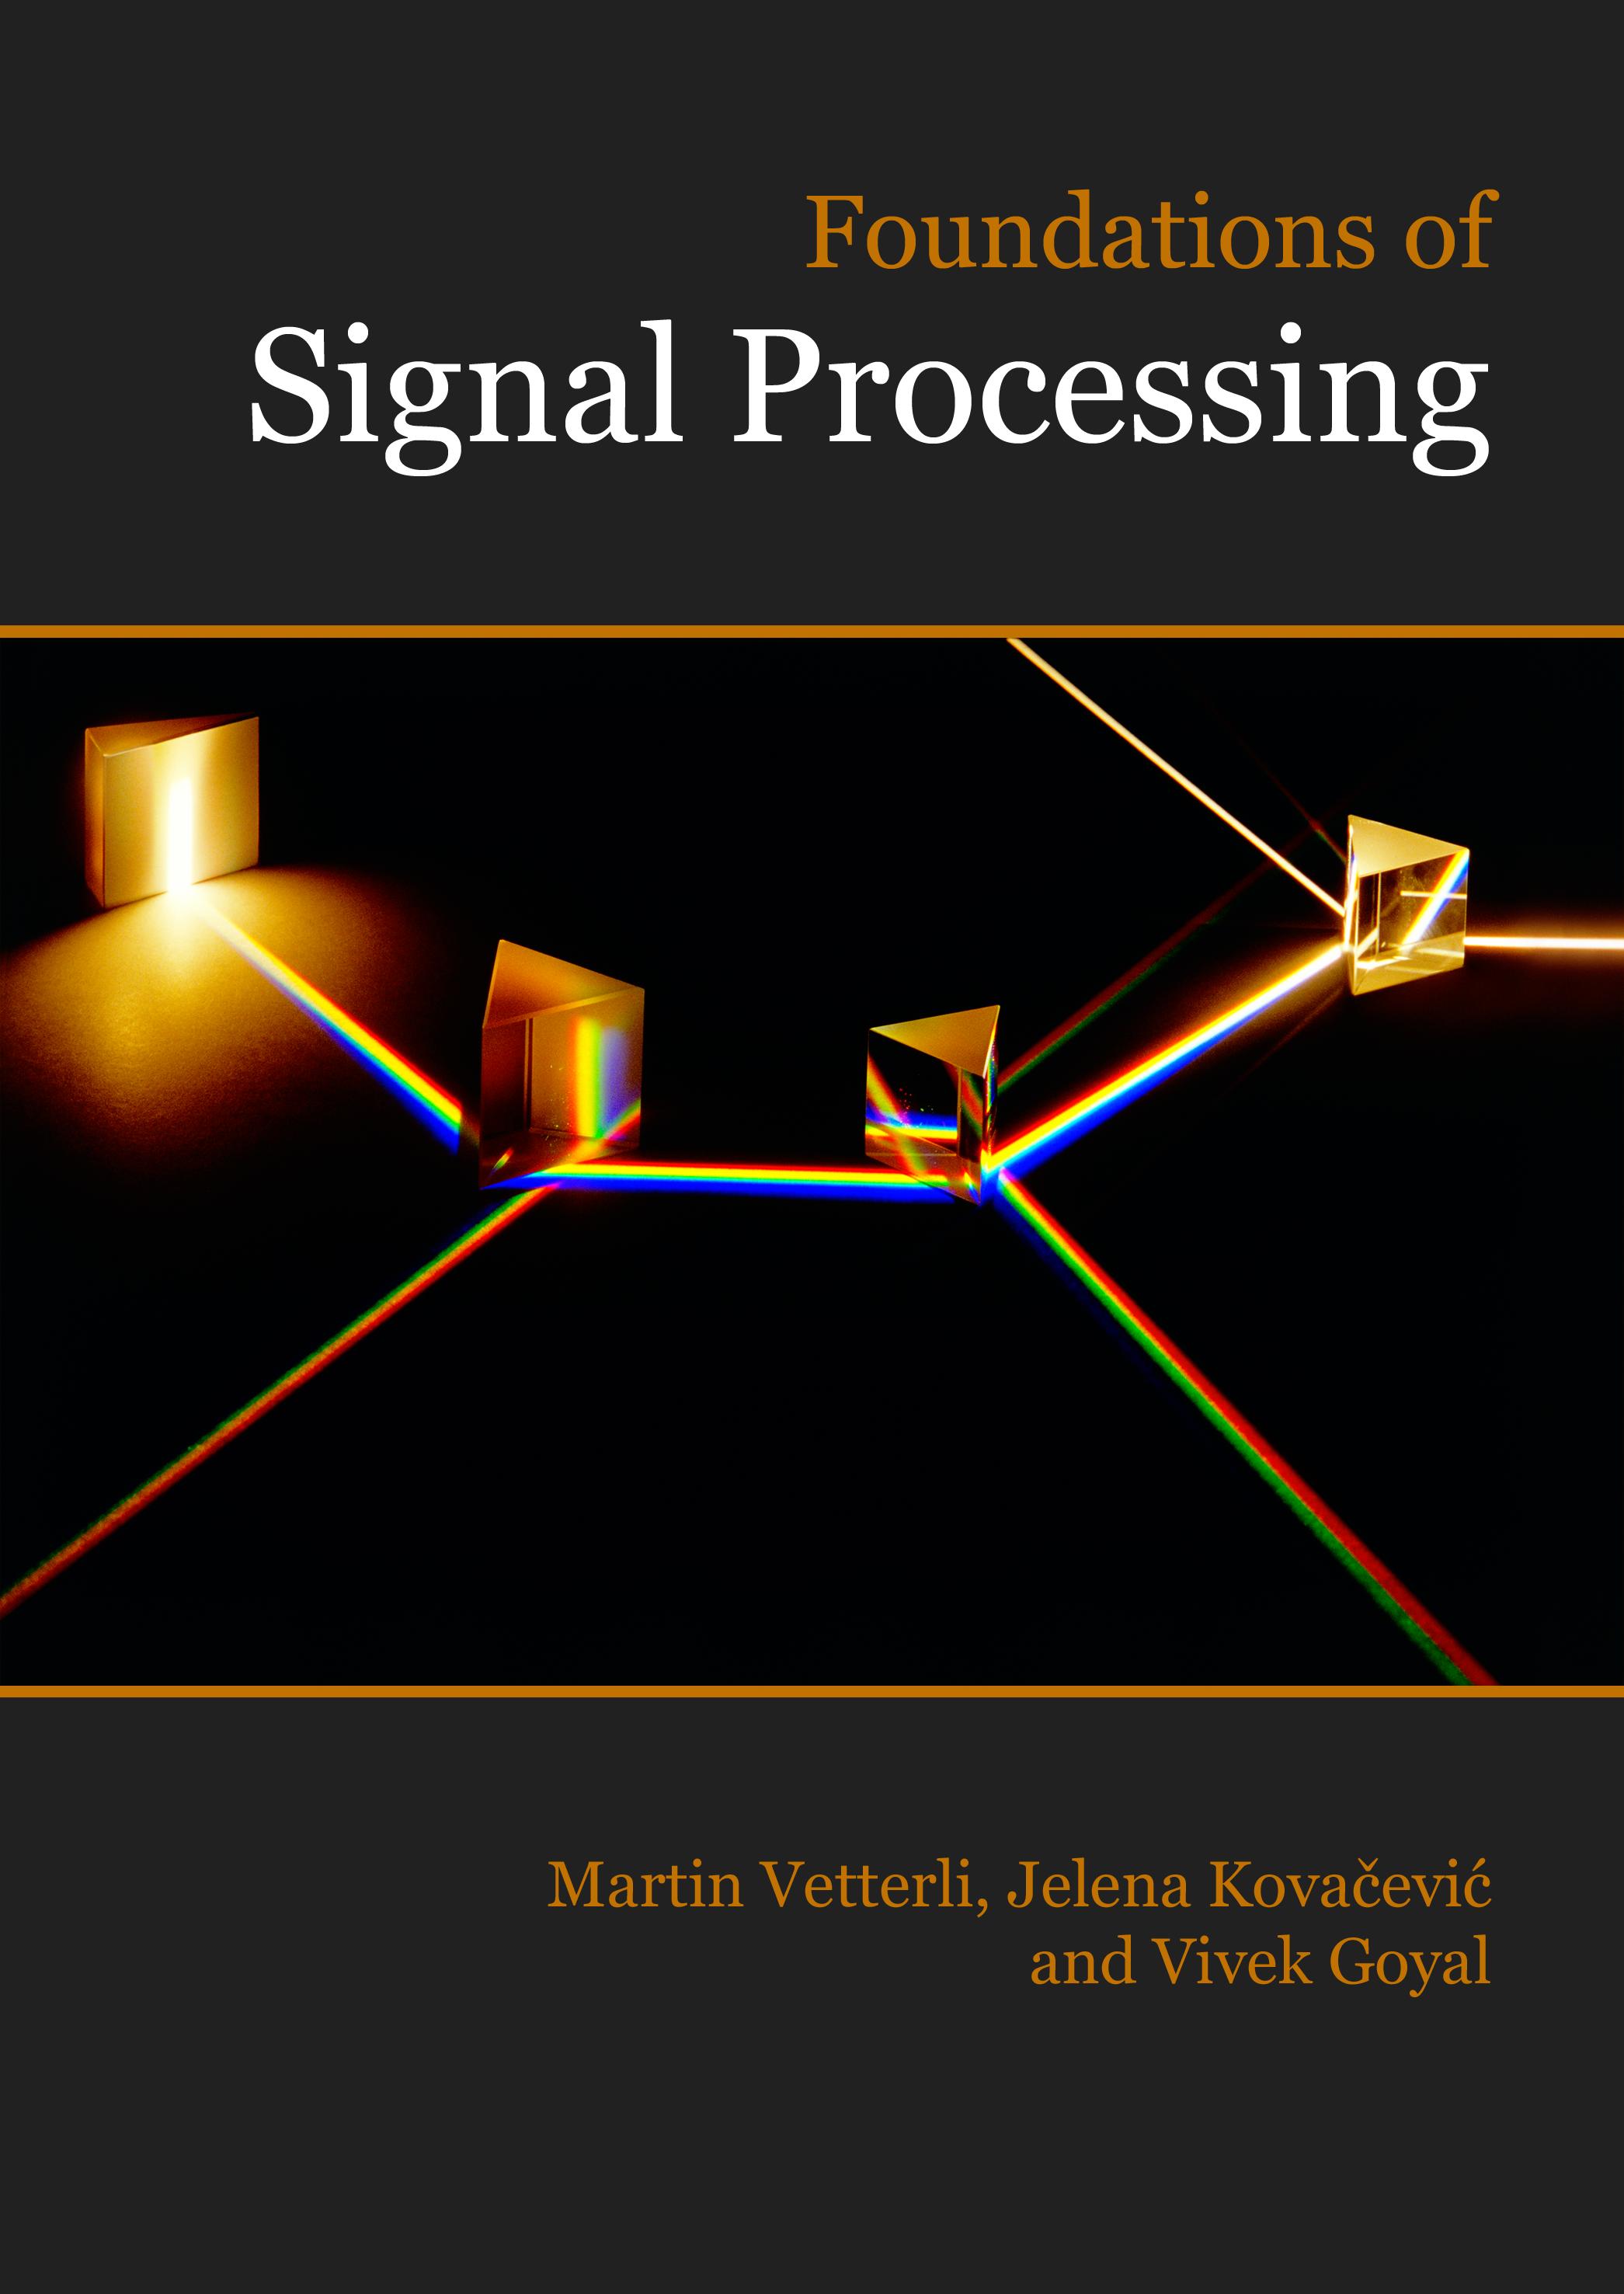 Signal Processing: Foundations by Vetterli, Kovacevic, and Goyal